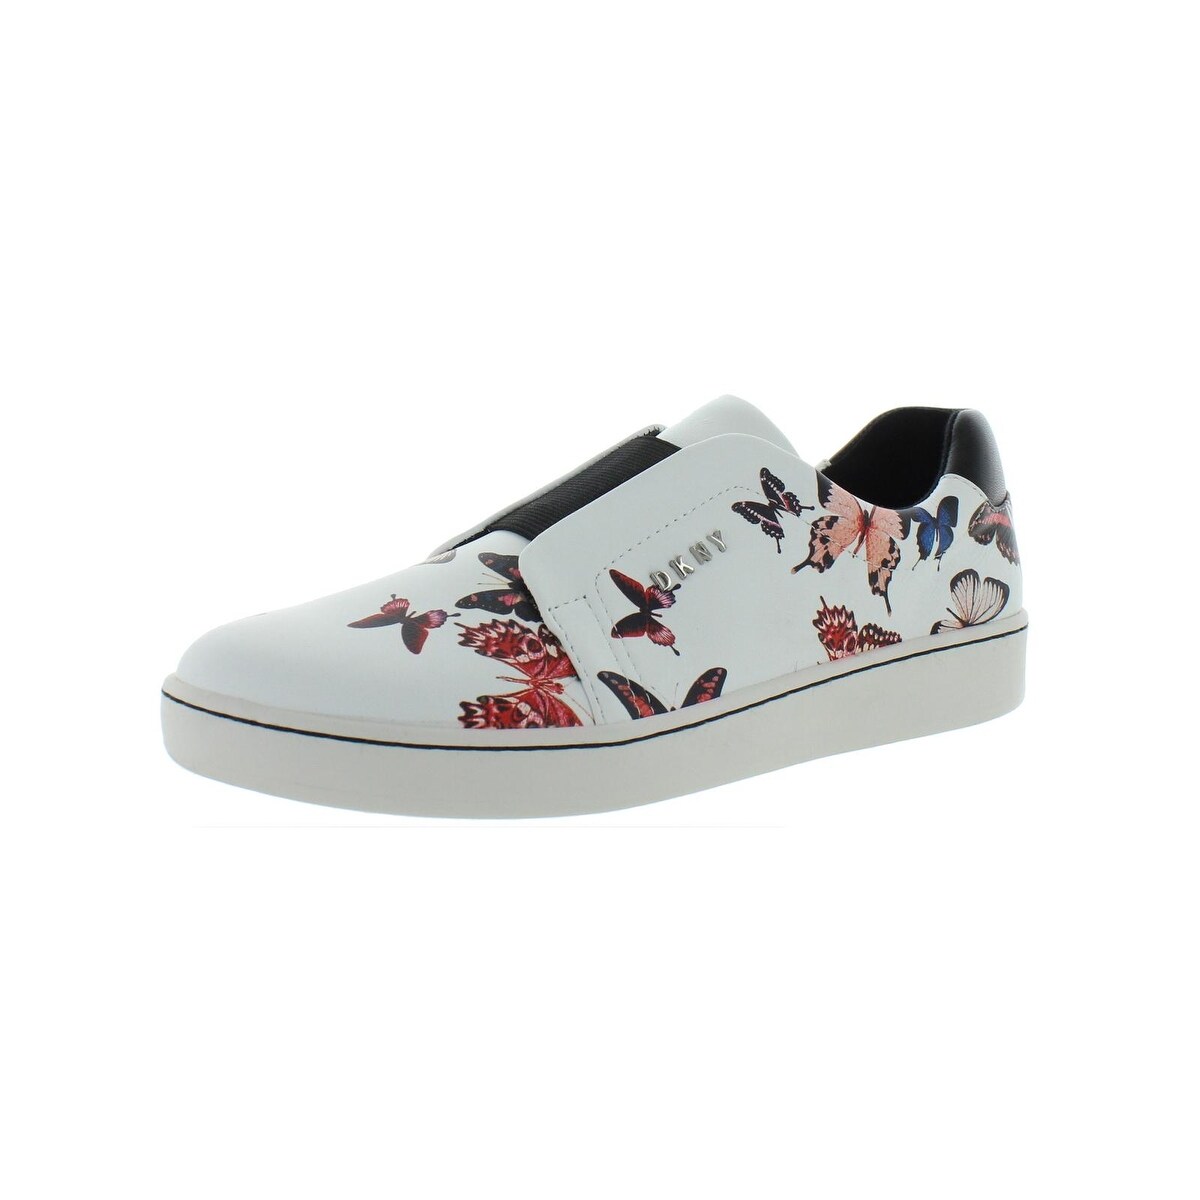 dkny butterfly shoes